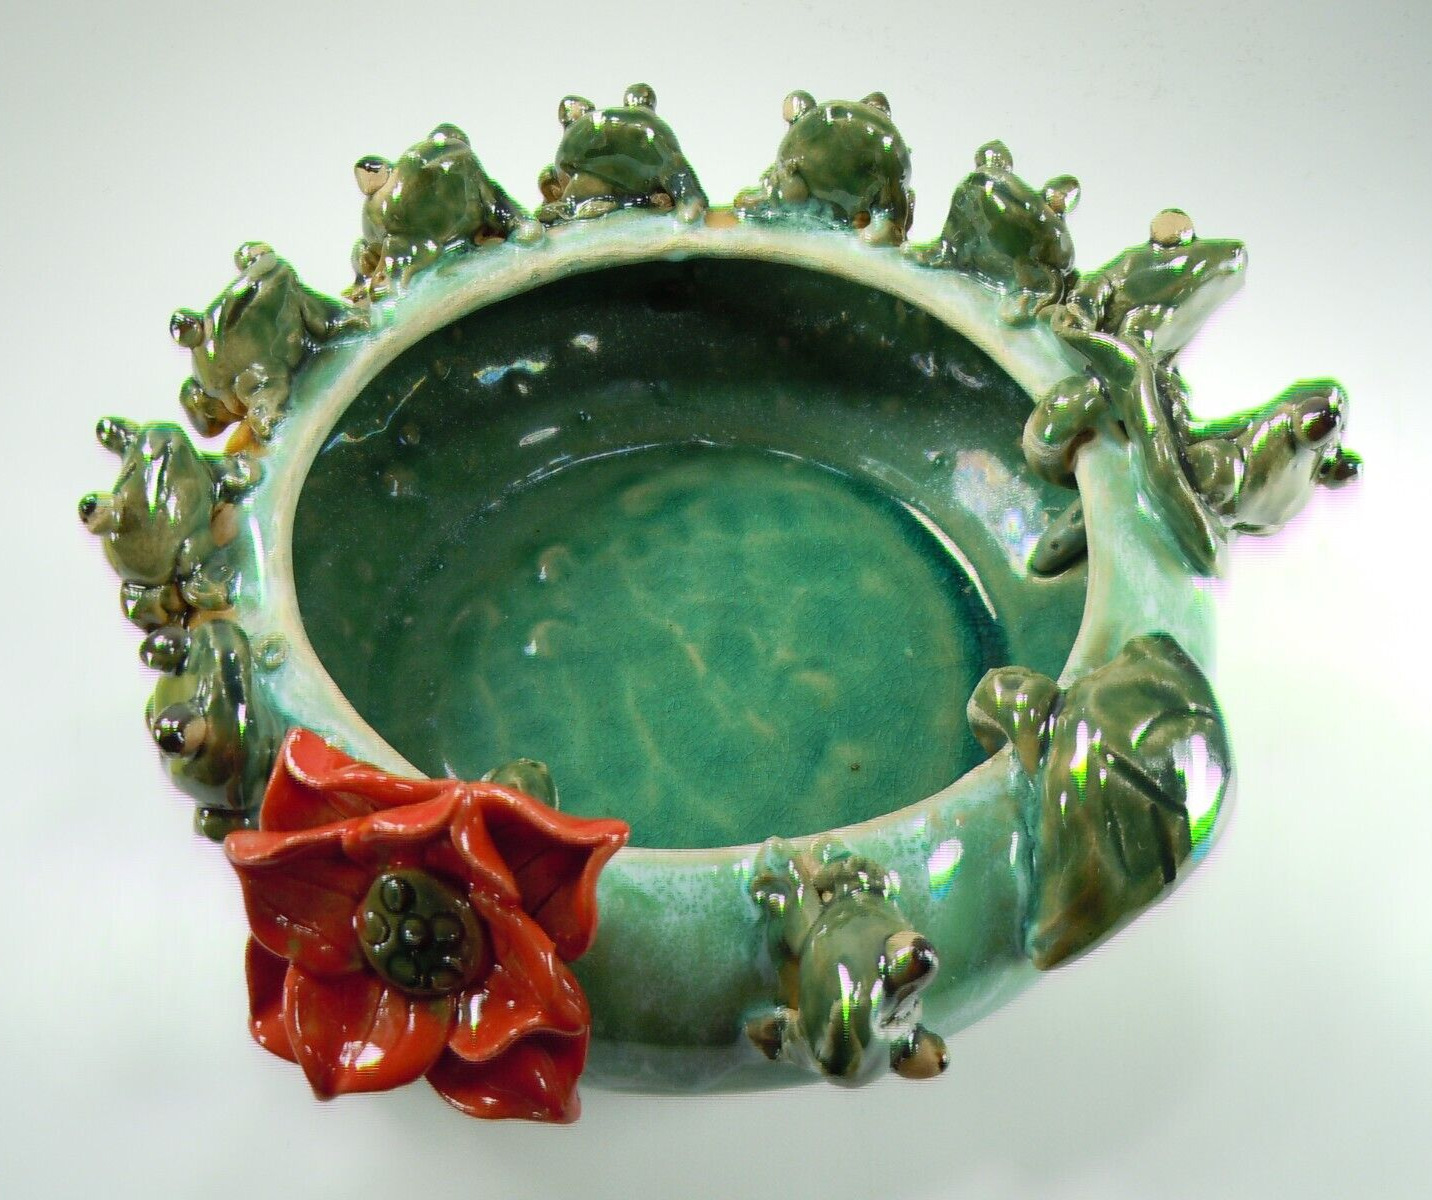 FROG BOWL Vintage Frogs Lily Pad Bowl w Majolica Red Flower Pottery Ceramic Dish